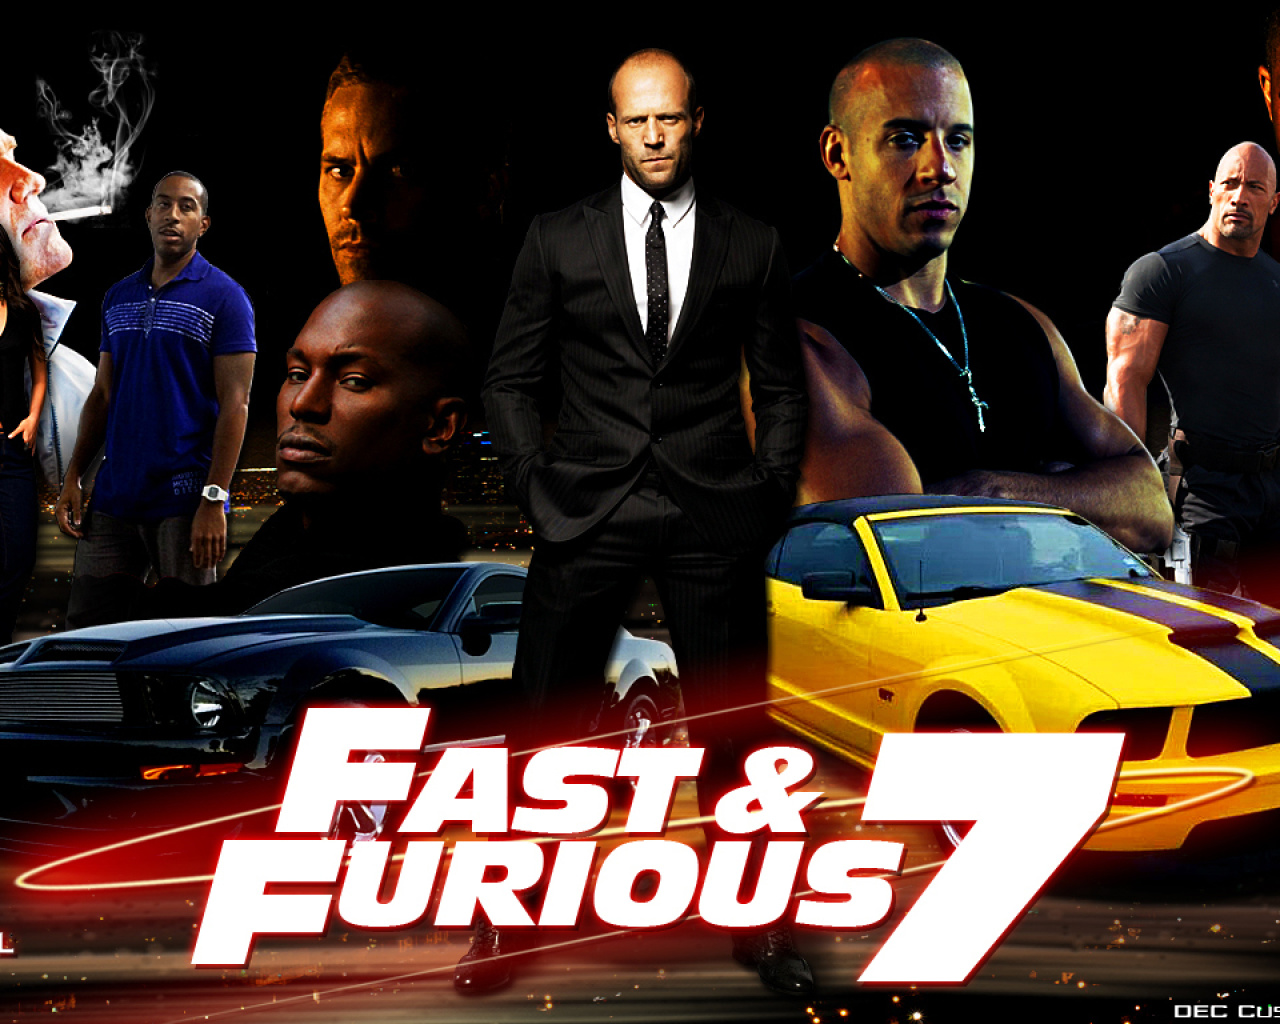 Fast and Furious 7 Movie wallpaper 1280x1024